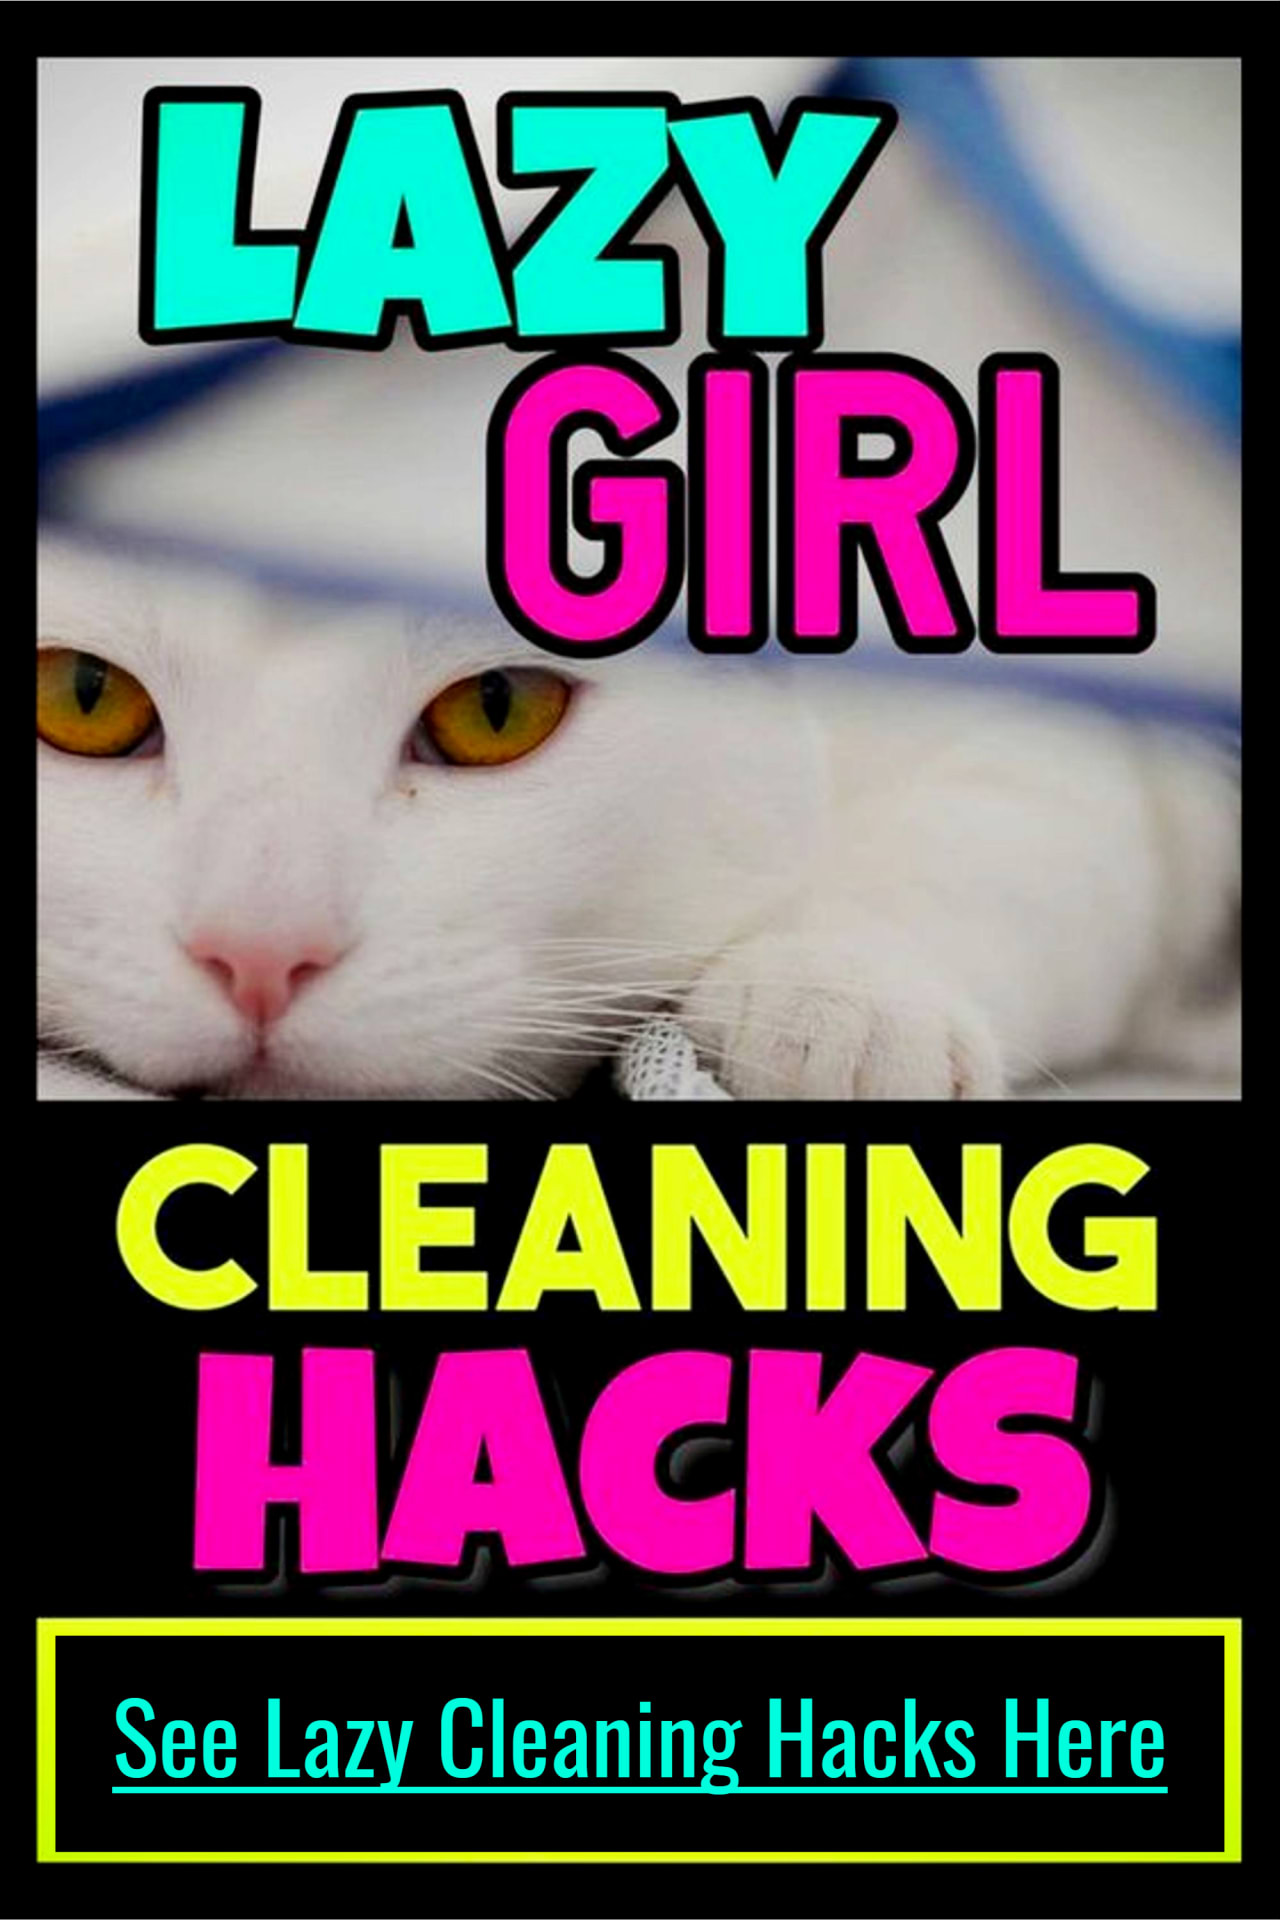 Lazy cleaning tips and cleaning hacks to clean a messy cluttered house FAST - even if feeling overwhelmed